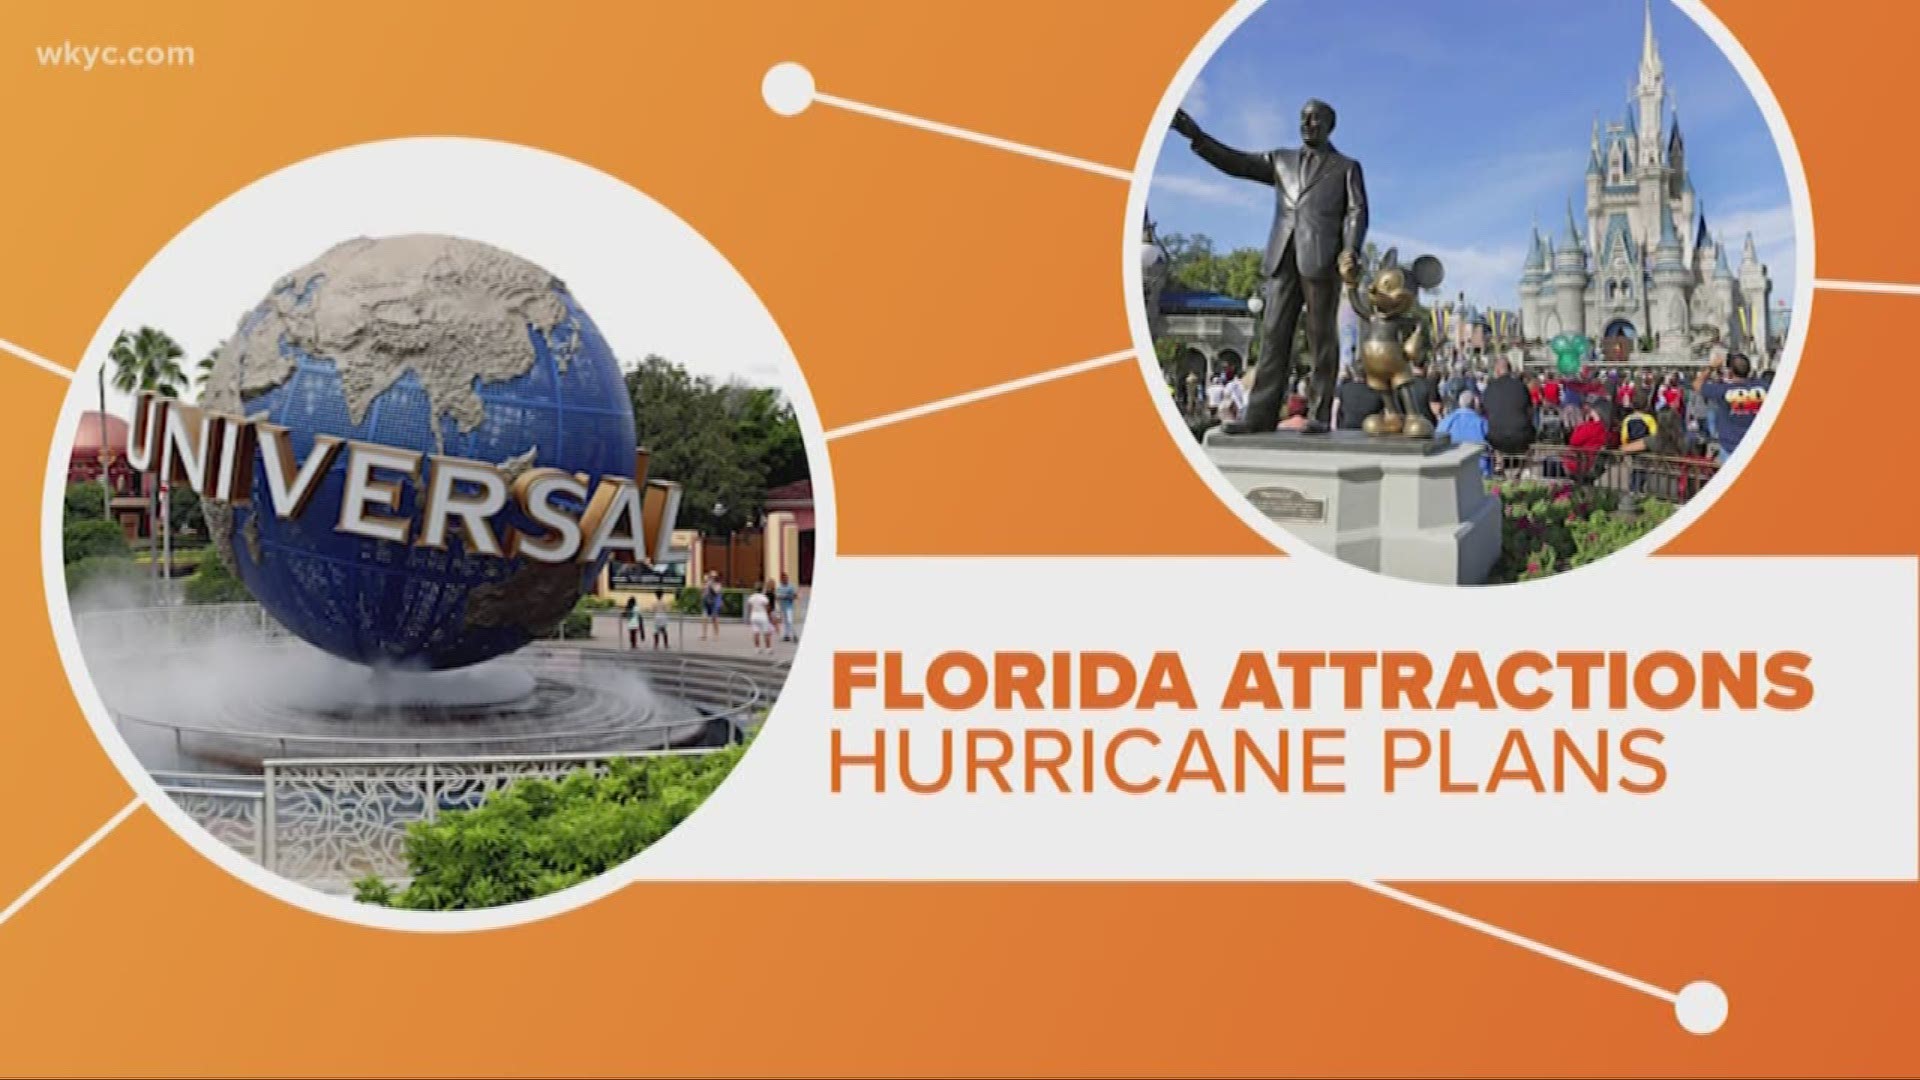 After months of saving money and weeks of planning, your family's dream vacation to Walt Disney World may be interrupted by a hurricane. So, what are your options when Disney's Florida theme parks happen to be in the path of a significant weather event? Here is what you can do...